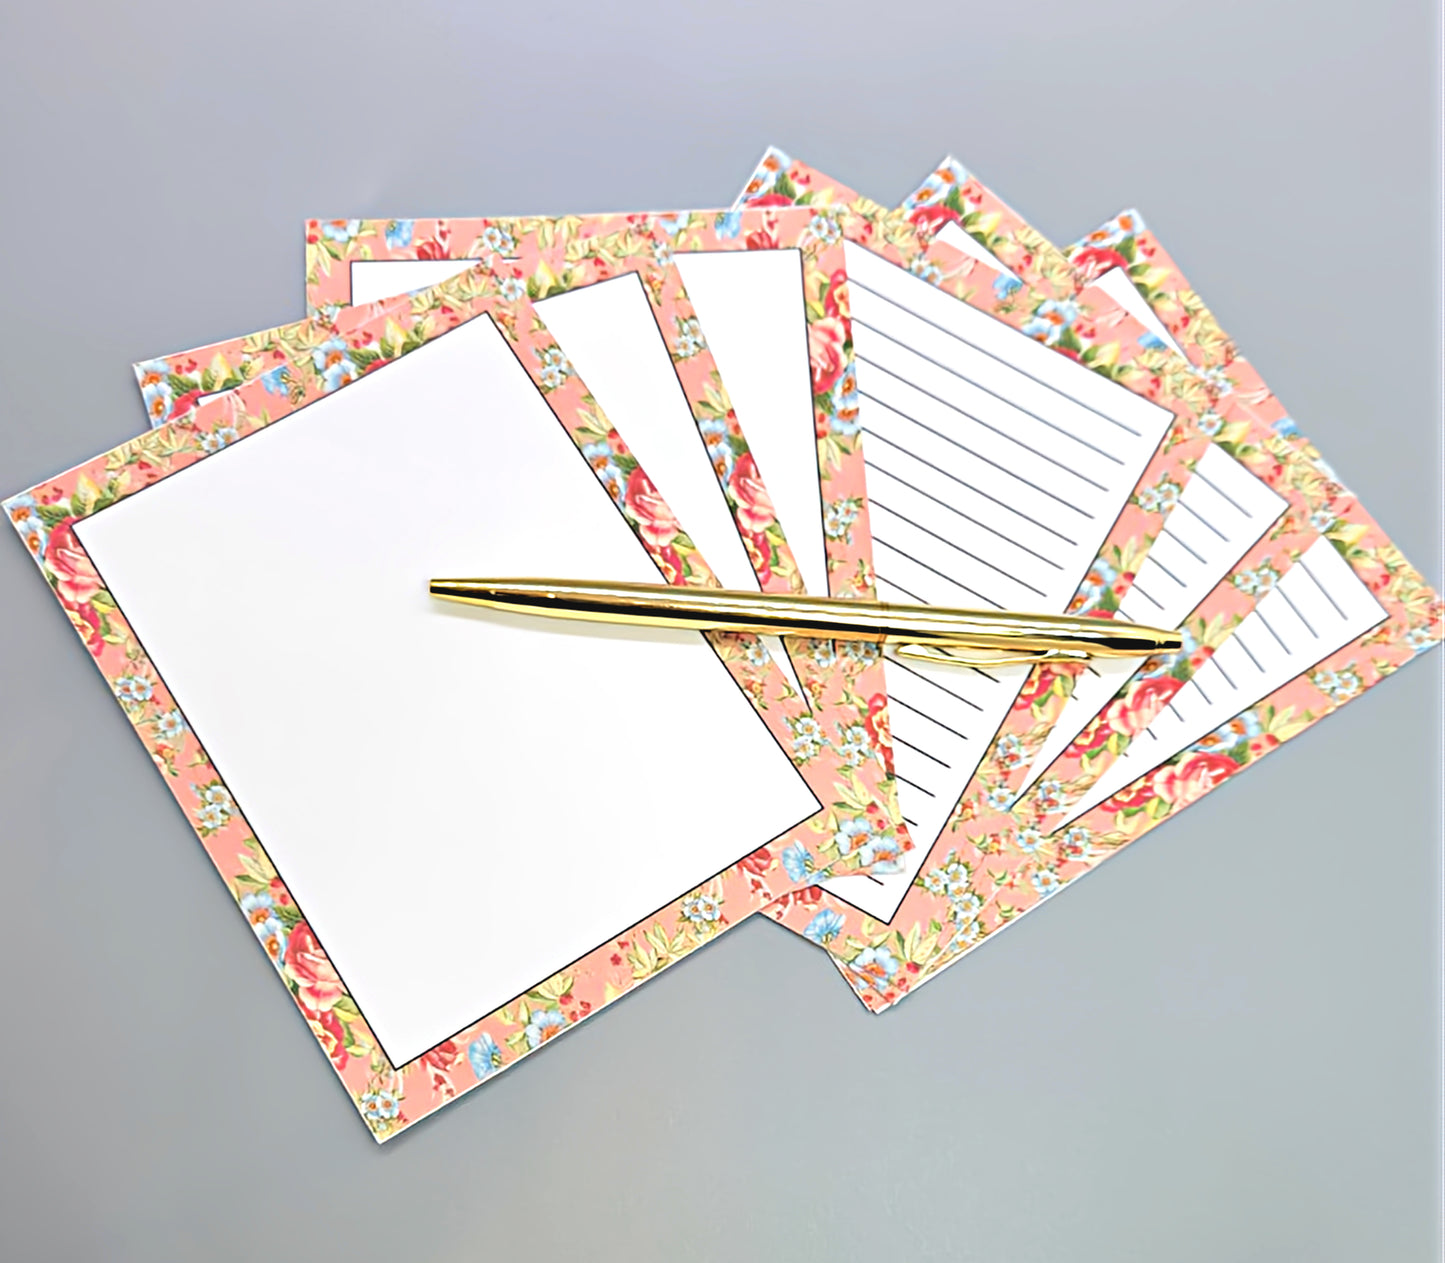 42-Pc Stationery Gift Box Set w/Reusable Desktop Organizer Box and Gold Pen - Coral Pink & Sage Green Floral - Chic Brico